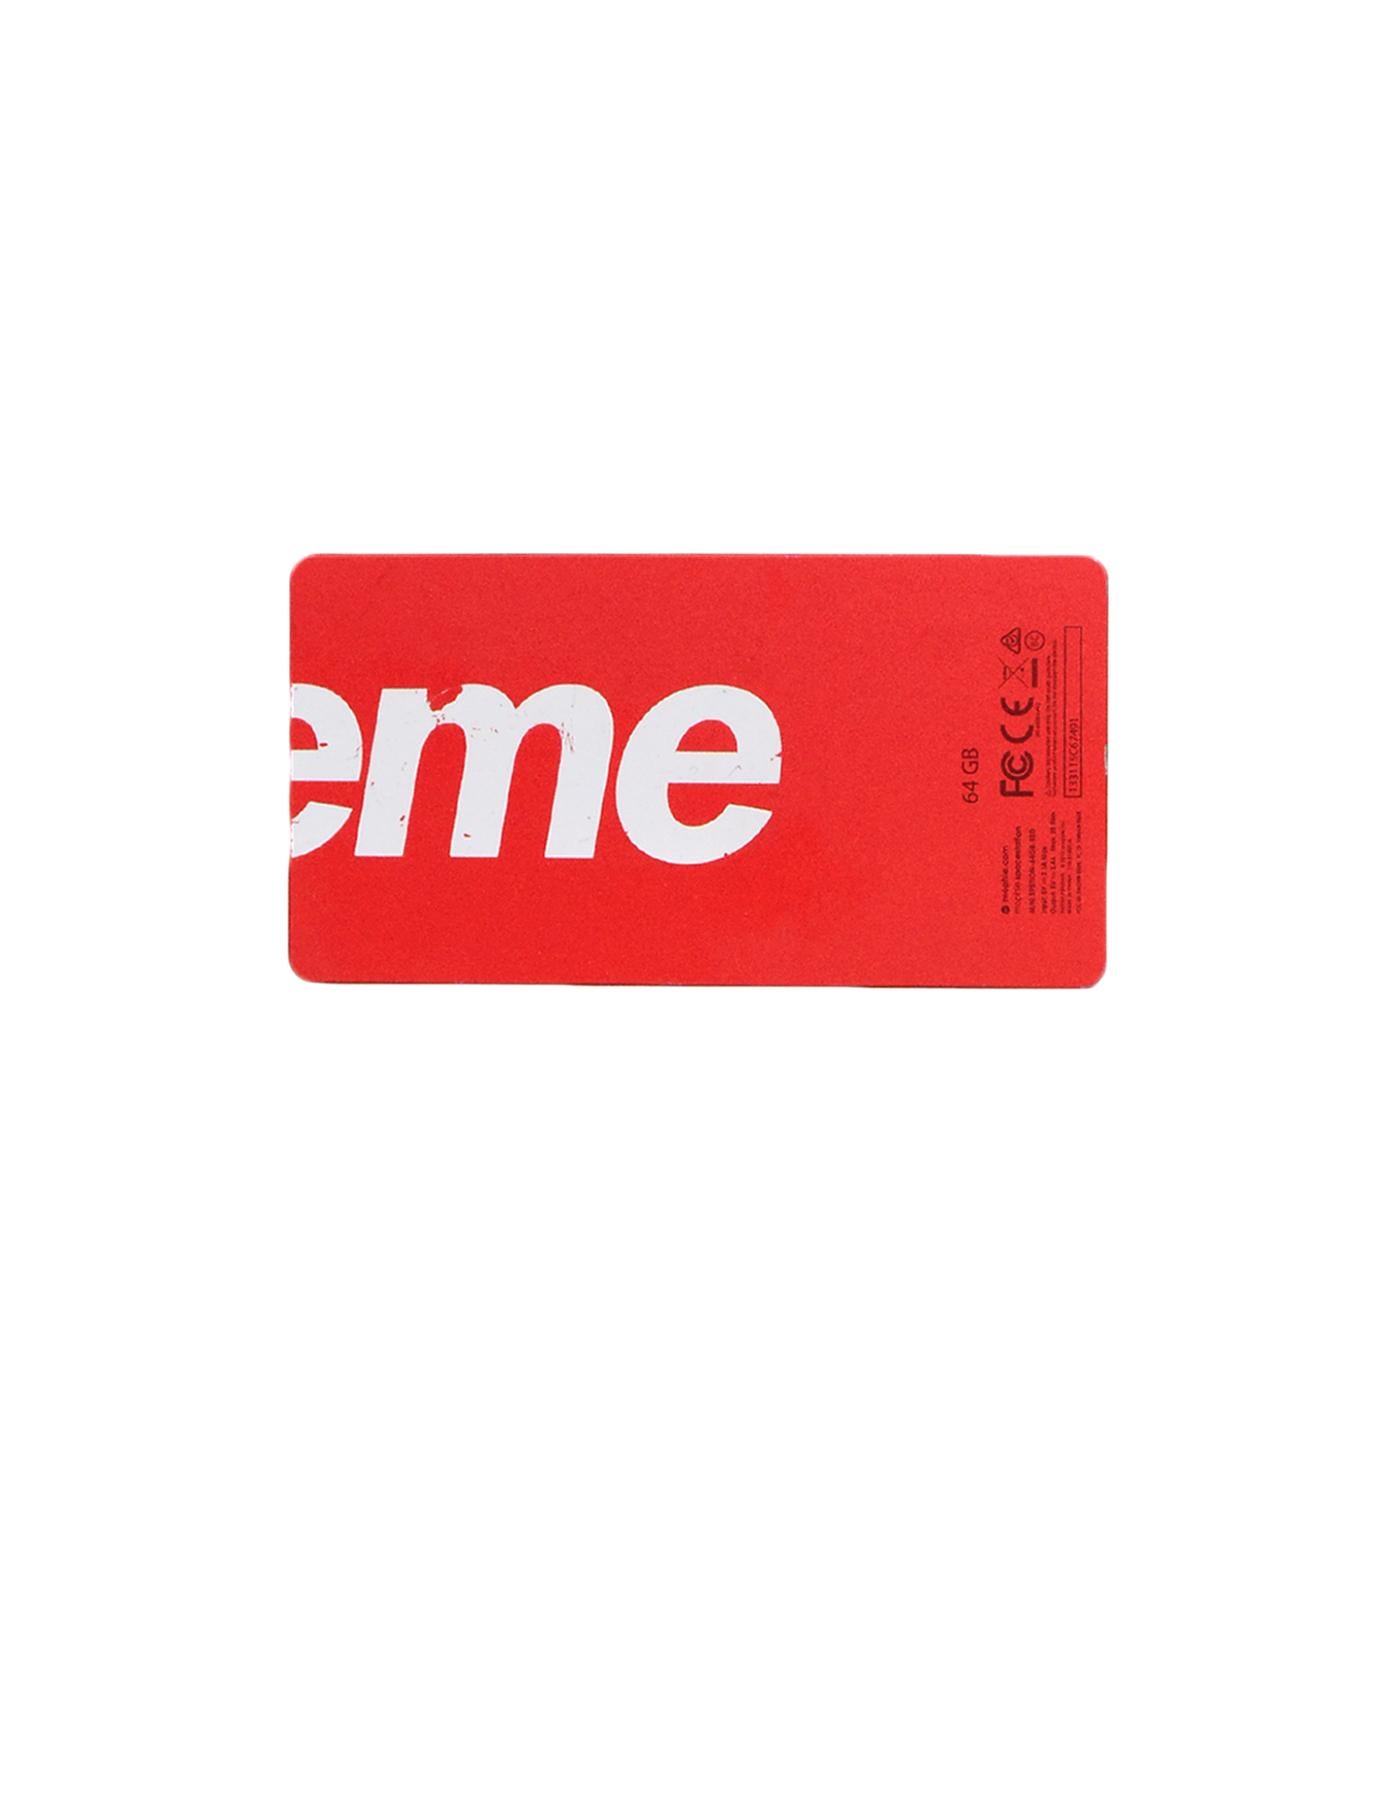 Supreme x Mophie 64gb External Storage/Battery Pack

Made In: China
Year of Production: 2015
Color: Red, White, Black
Materials: Metal
Overall Condition: Very good pre-owned condition.  Wear to lettering.

Measurements: 
4.25